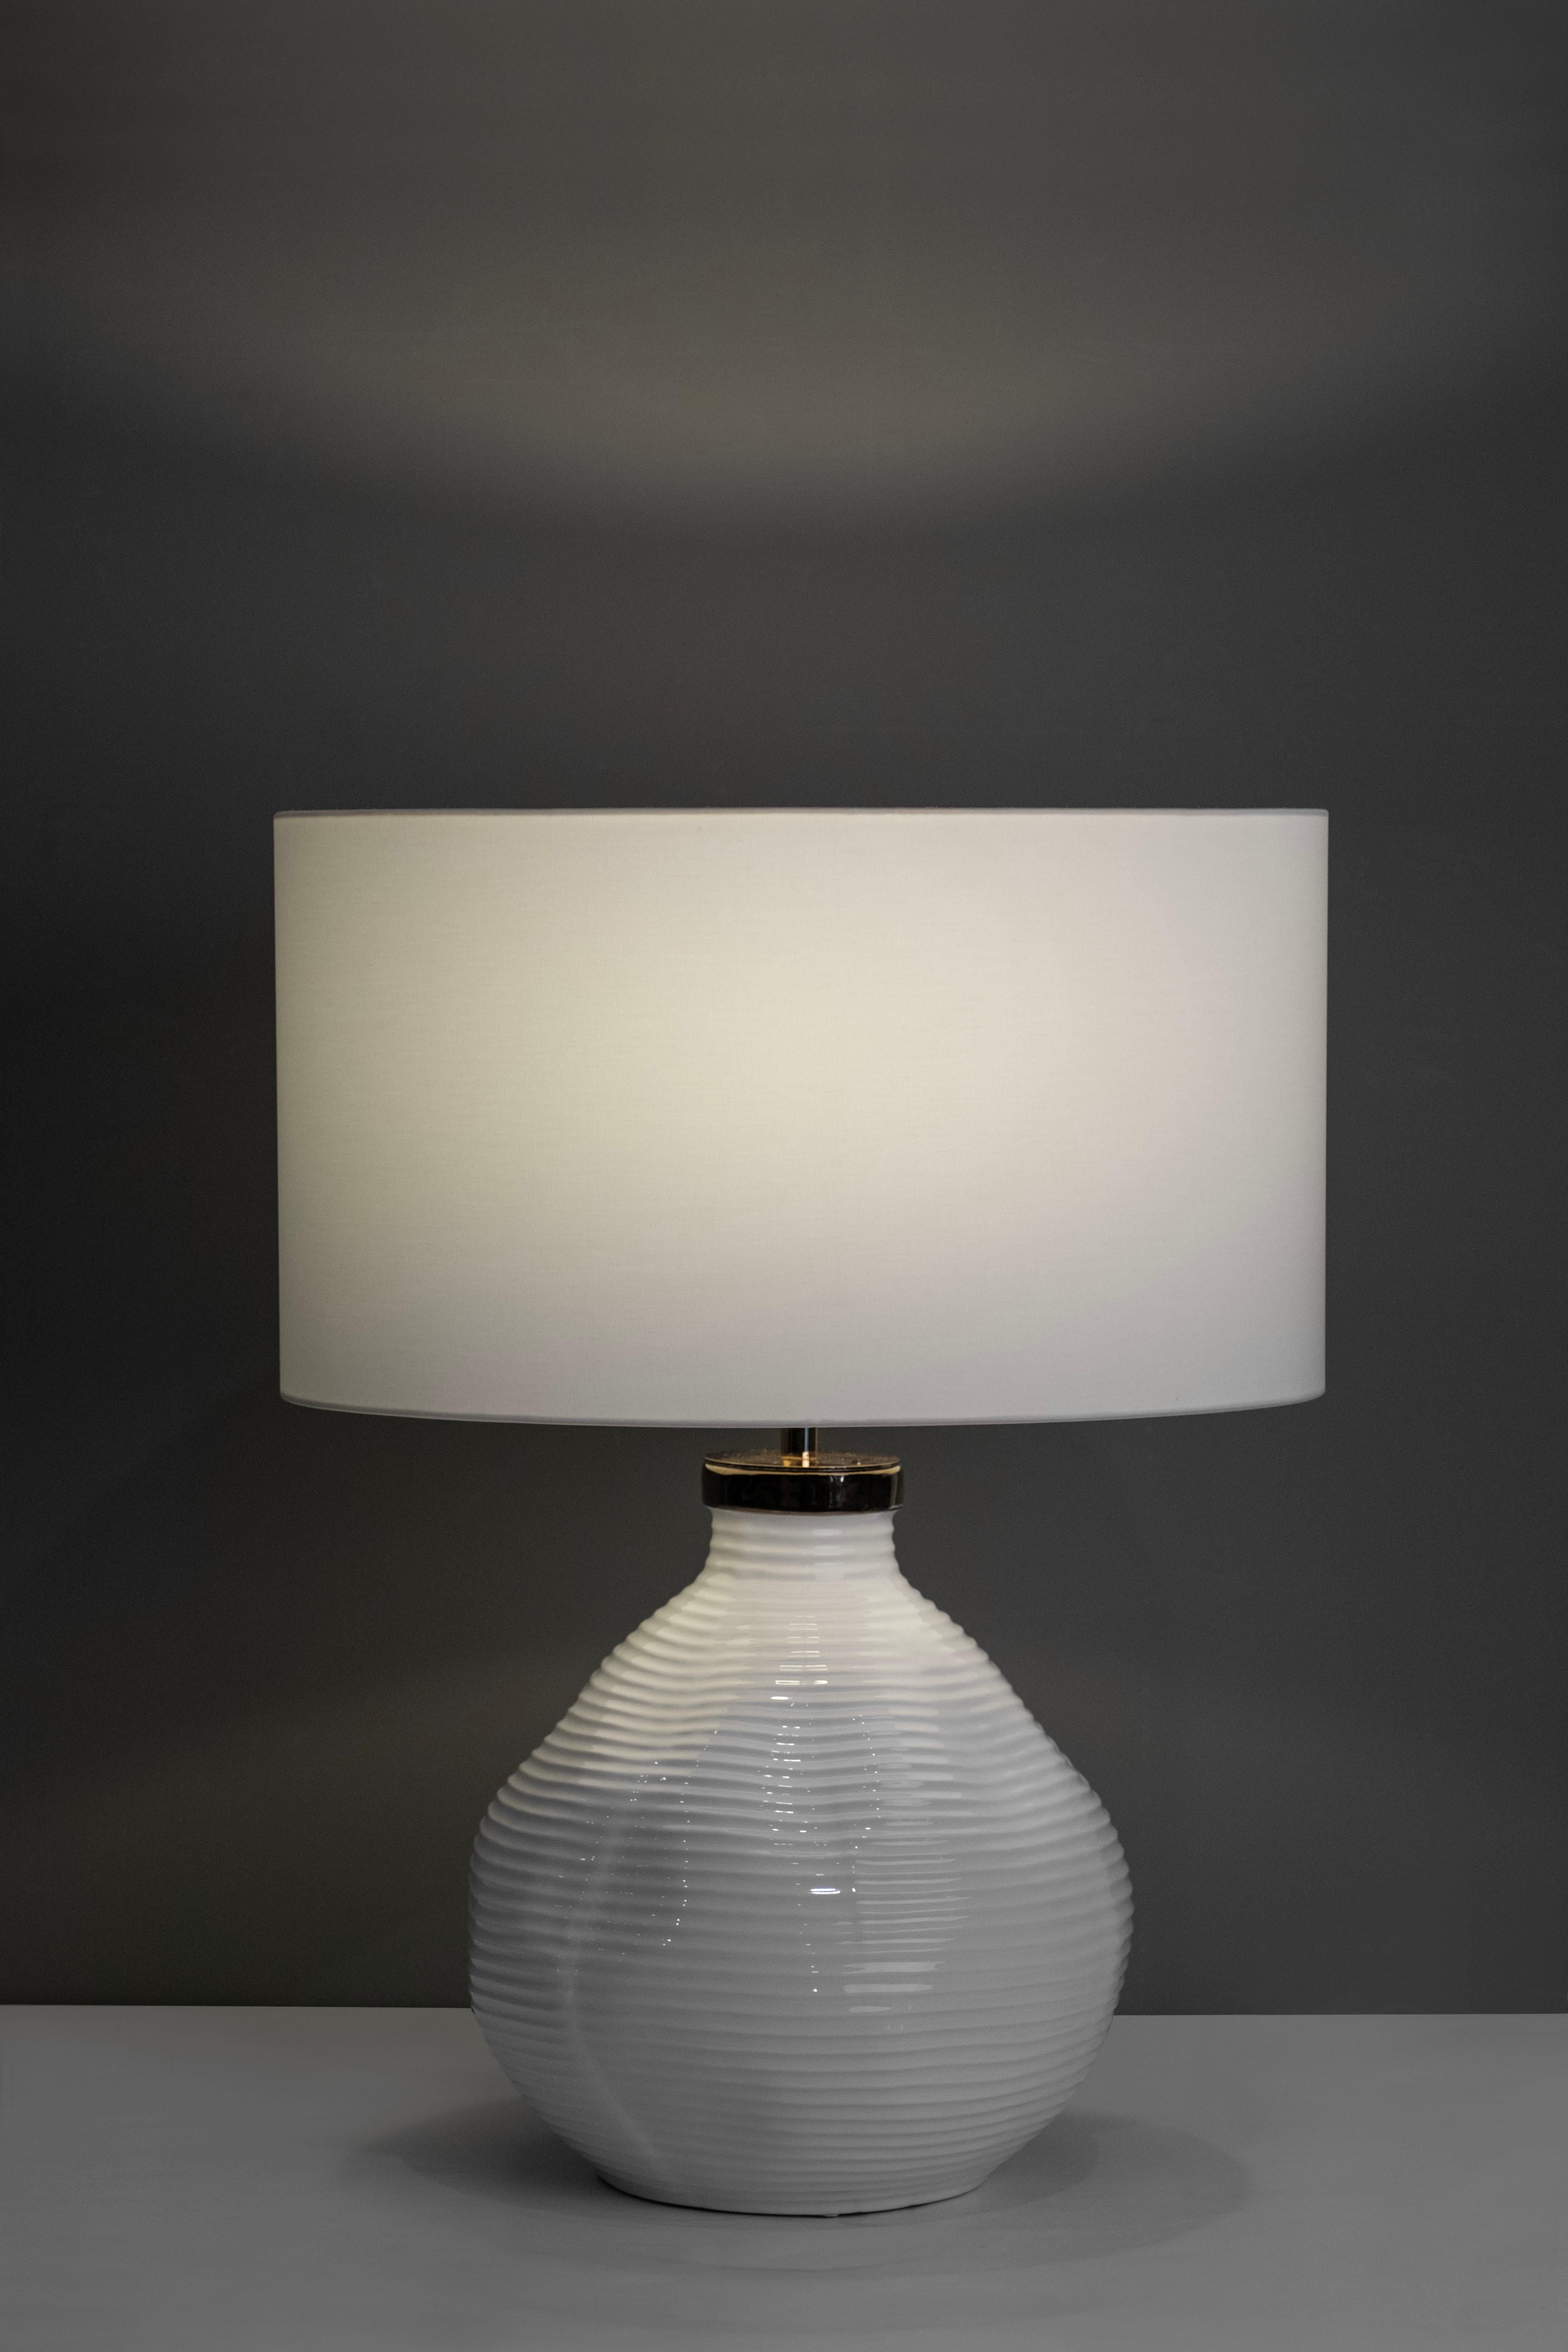 Candeias Table Lamp, Modern Collection, Handcrafted in Portugal - Europe by GF Modern.

The Candeias table lamp creates a subliminal ambience for extraordinary living. The base in white glazed ceramic with a gold detail on top harmonizes seamlessly